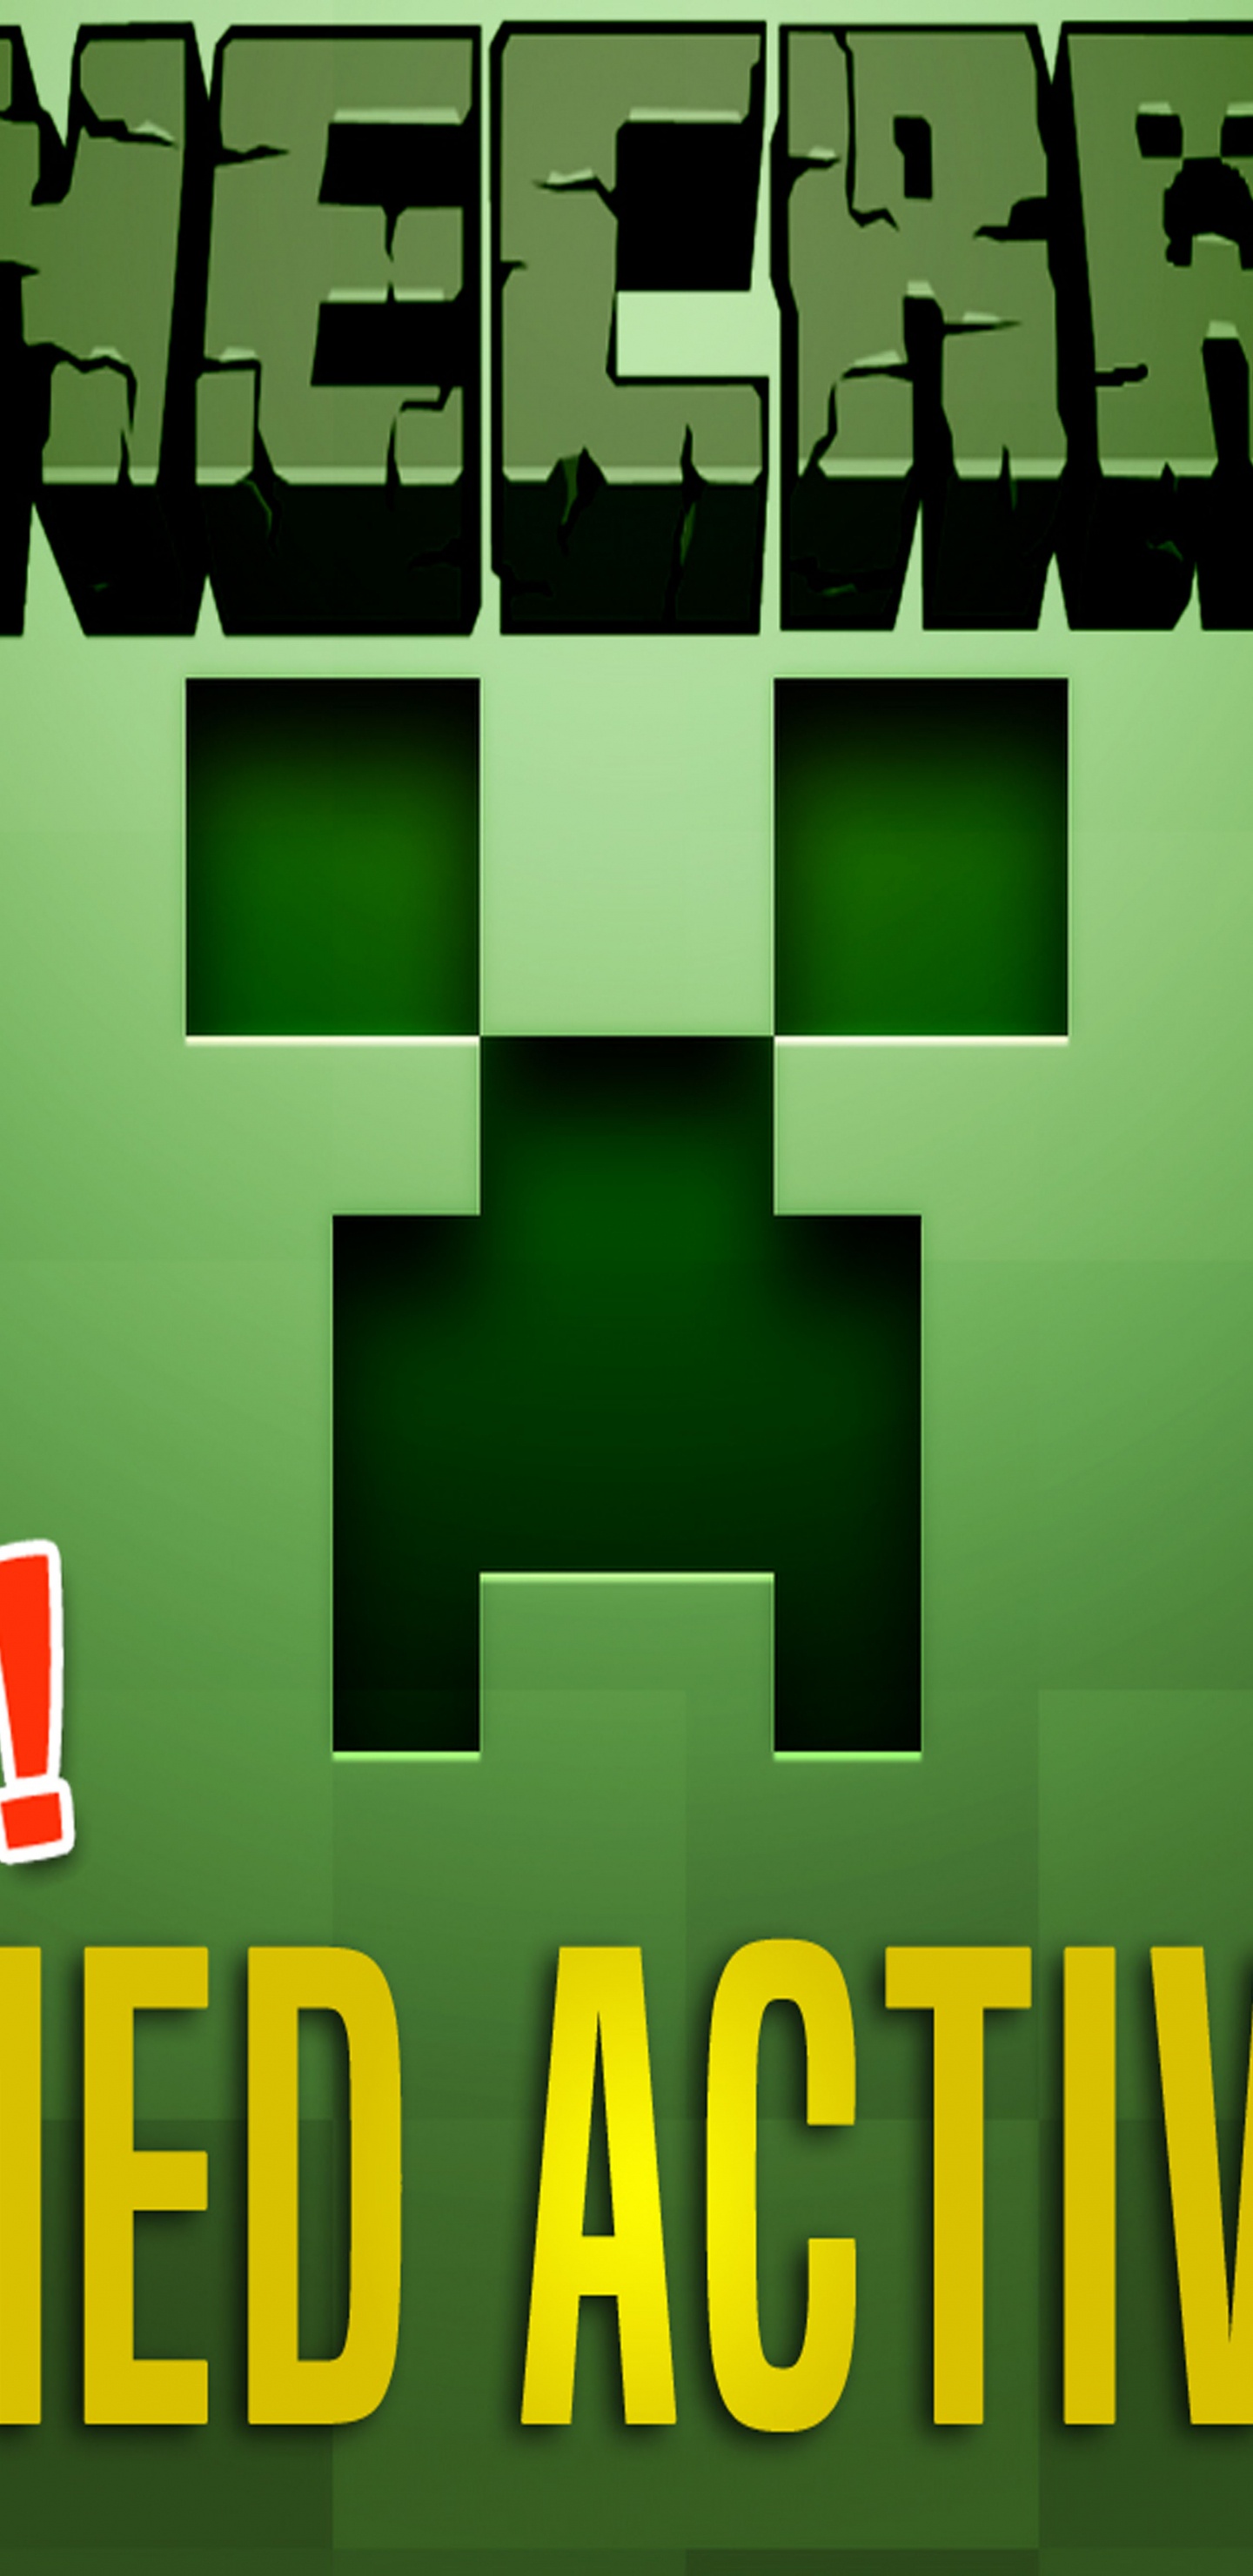 Minecraft, Green, Games, Creeper, Survival Game. Wallpaper in 1440x2960 Resolution